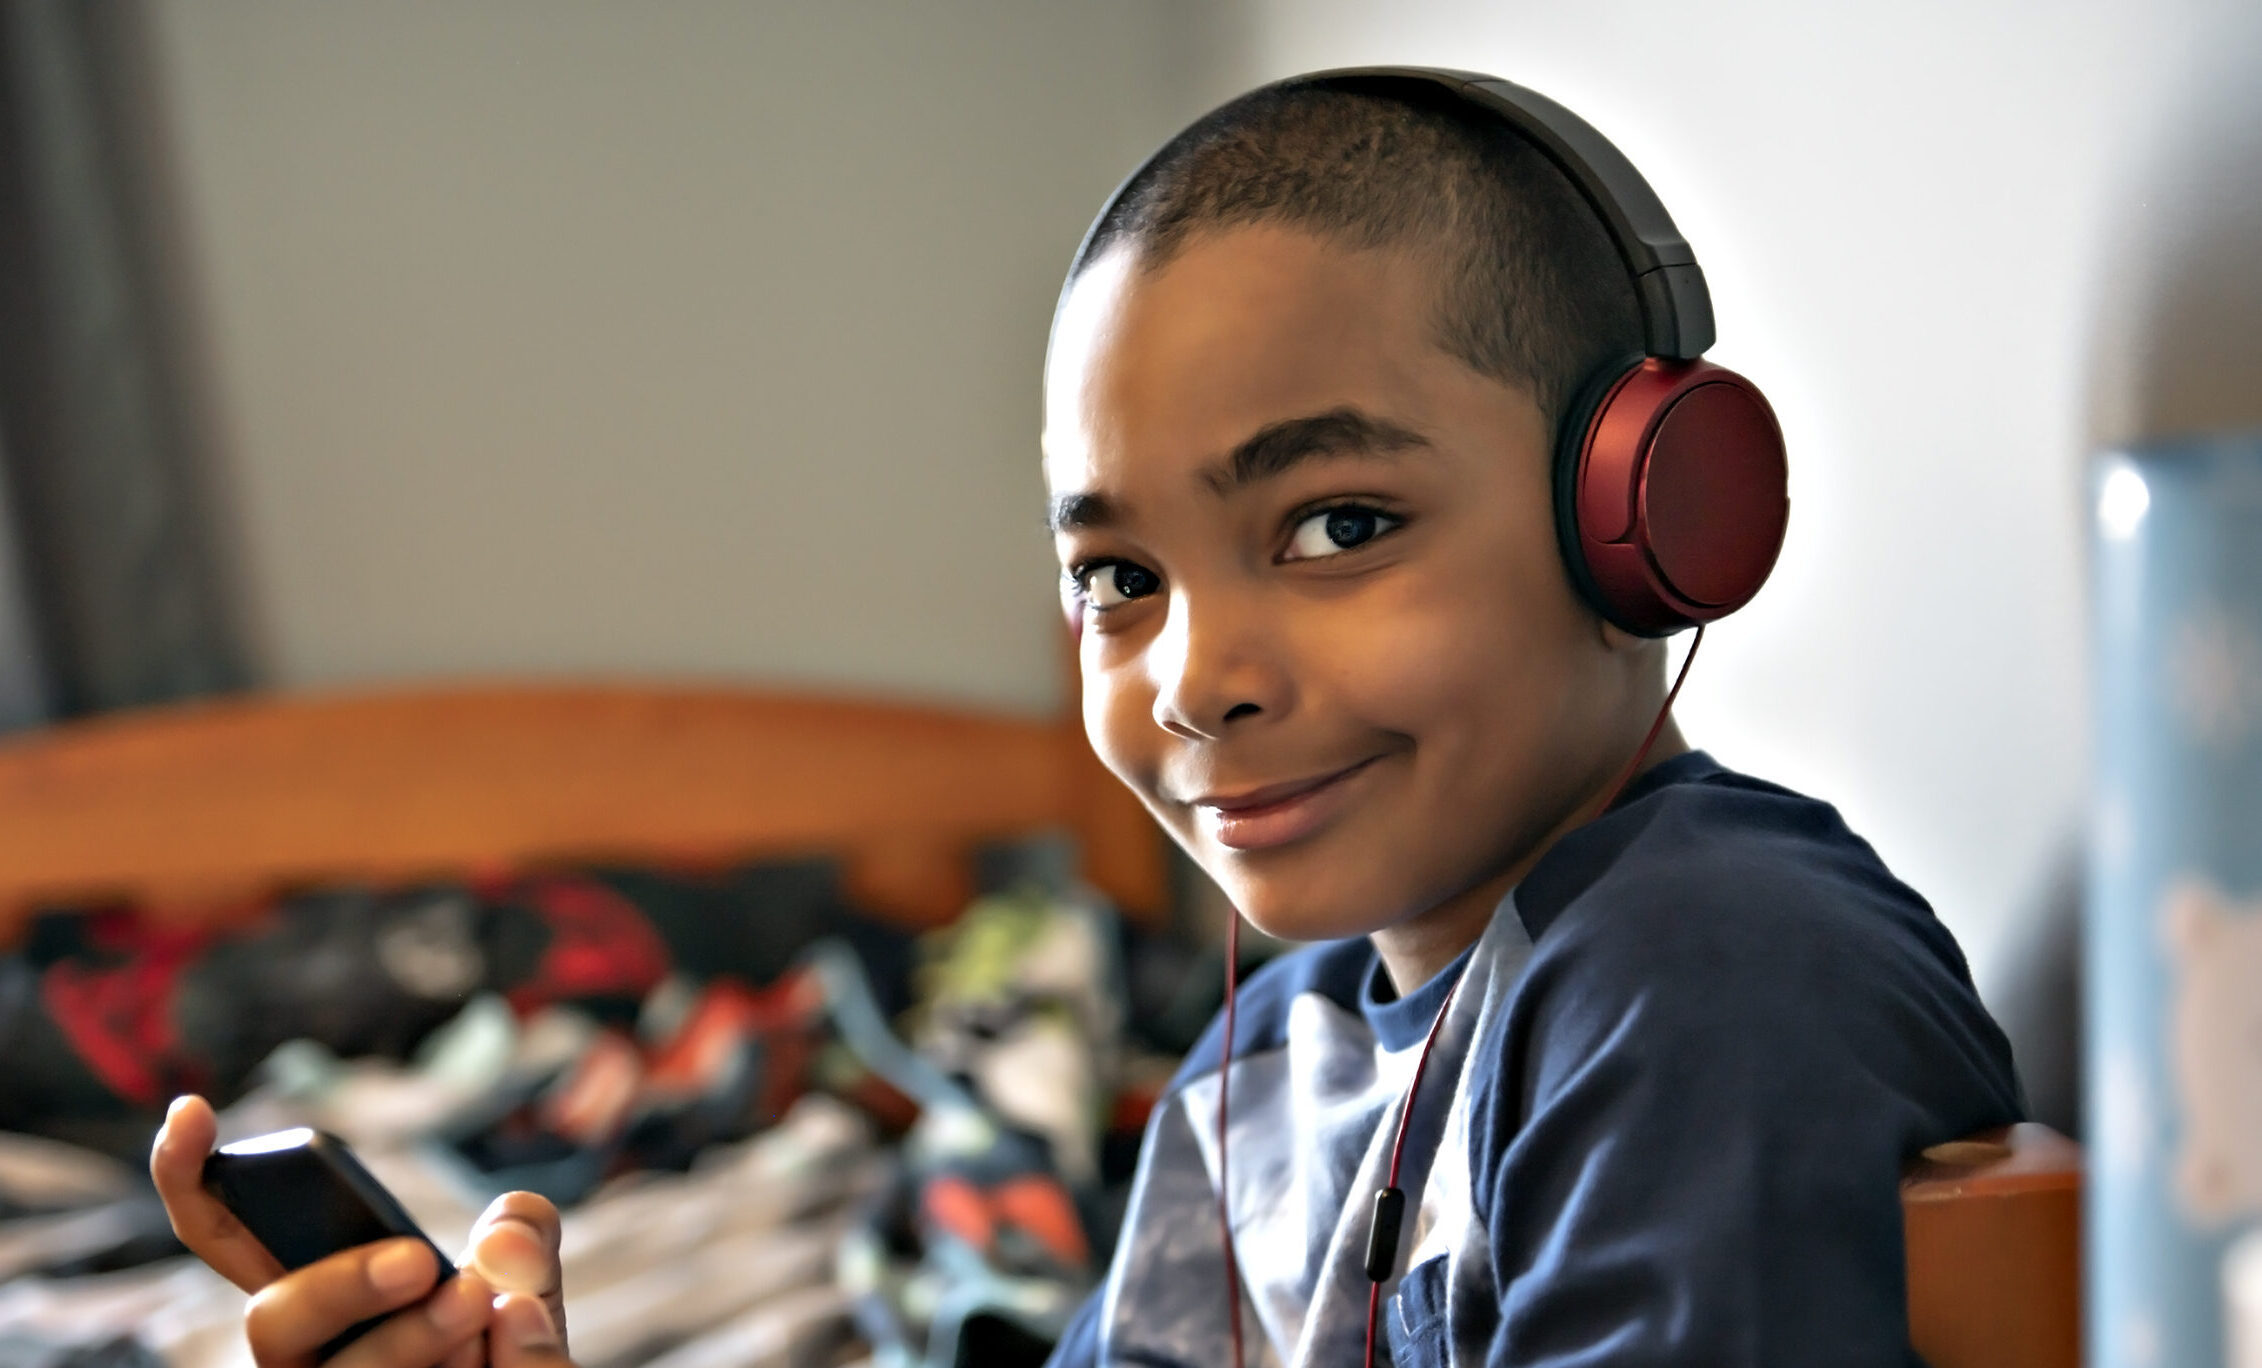 the photo shows a boy with short dark hair and eyes, who is sitting at the end of his bed wearing red headphones and smiling straight at the camera